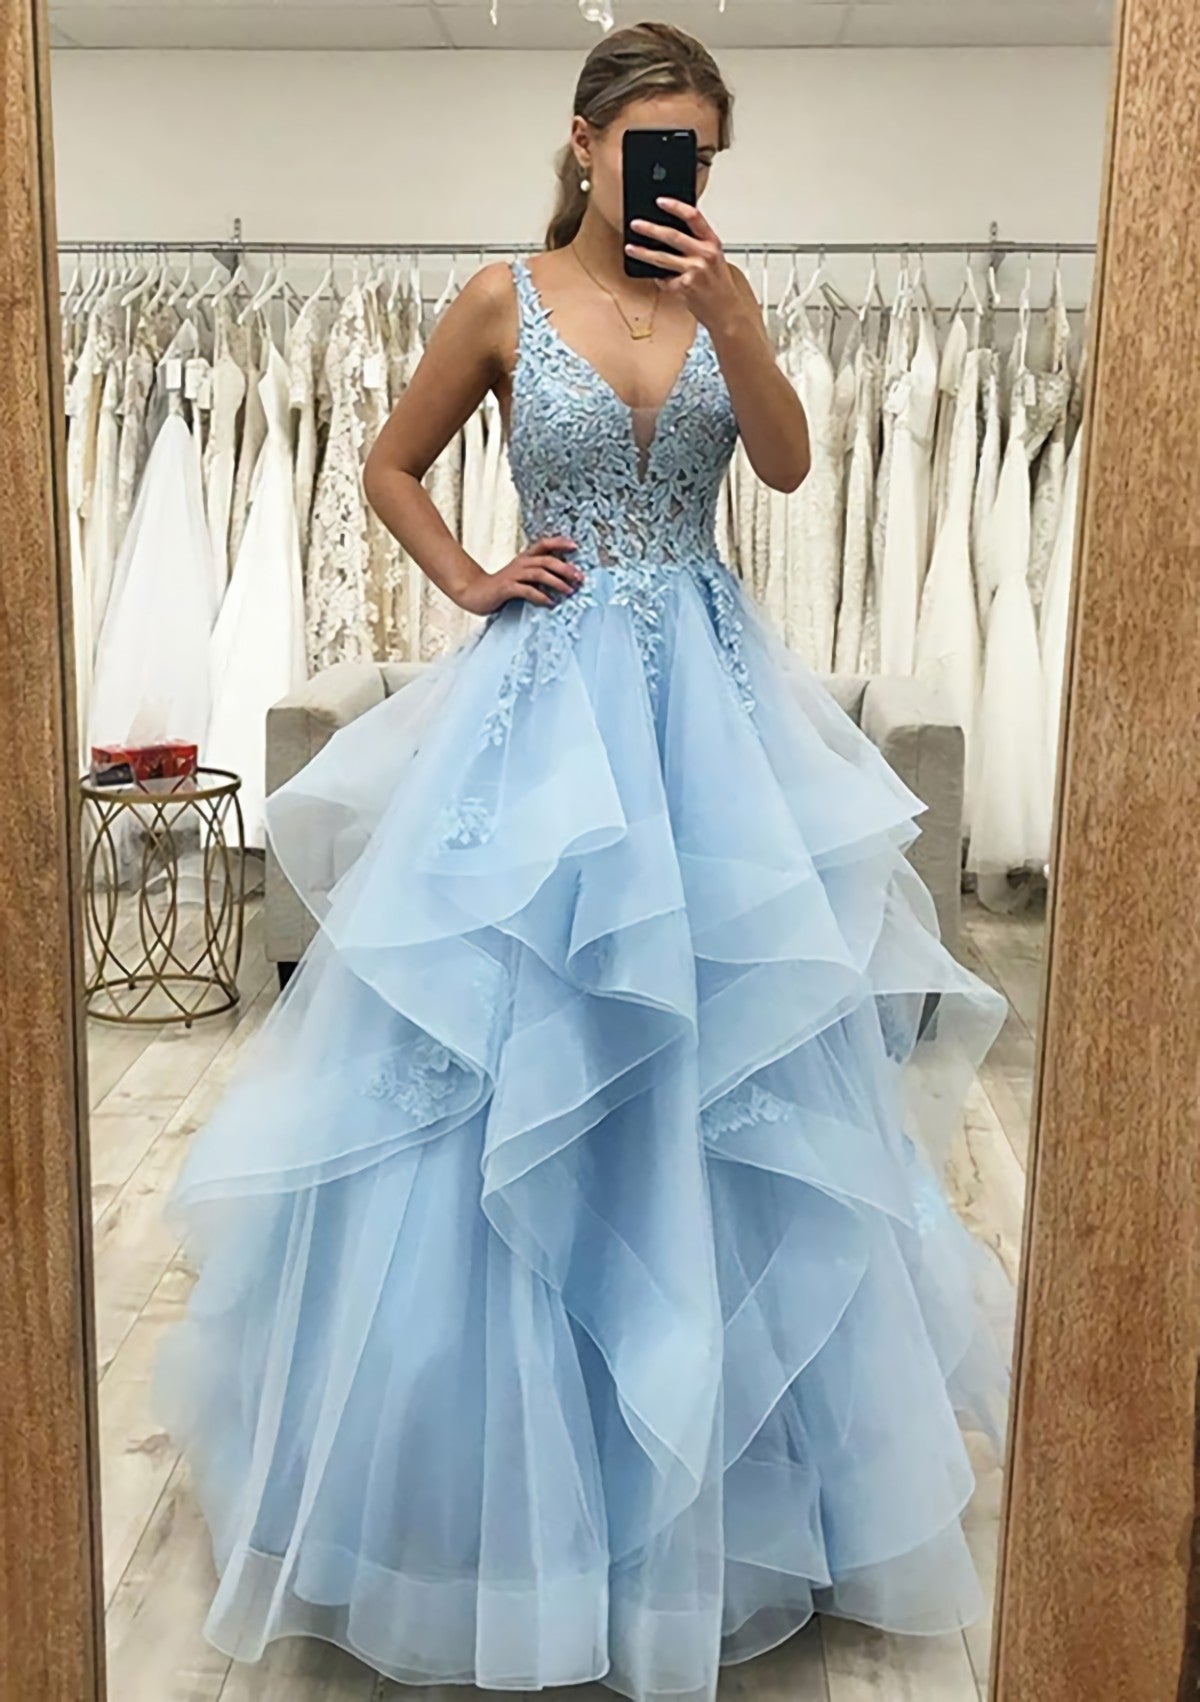 Plu Size Prom Dress, A-line V Neck Sleeveless Long/Floor-Length Tulle Satin Prom Dress With Lace Appliqued